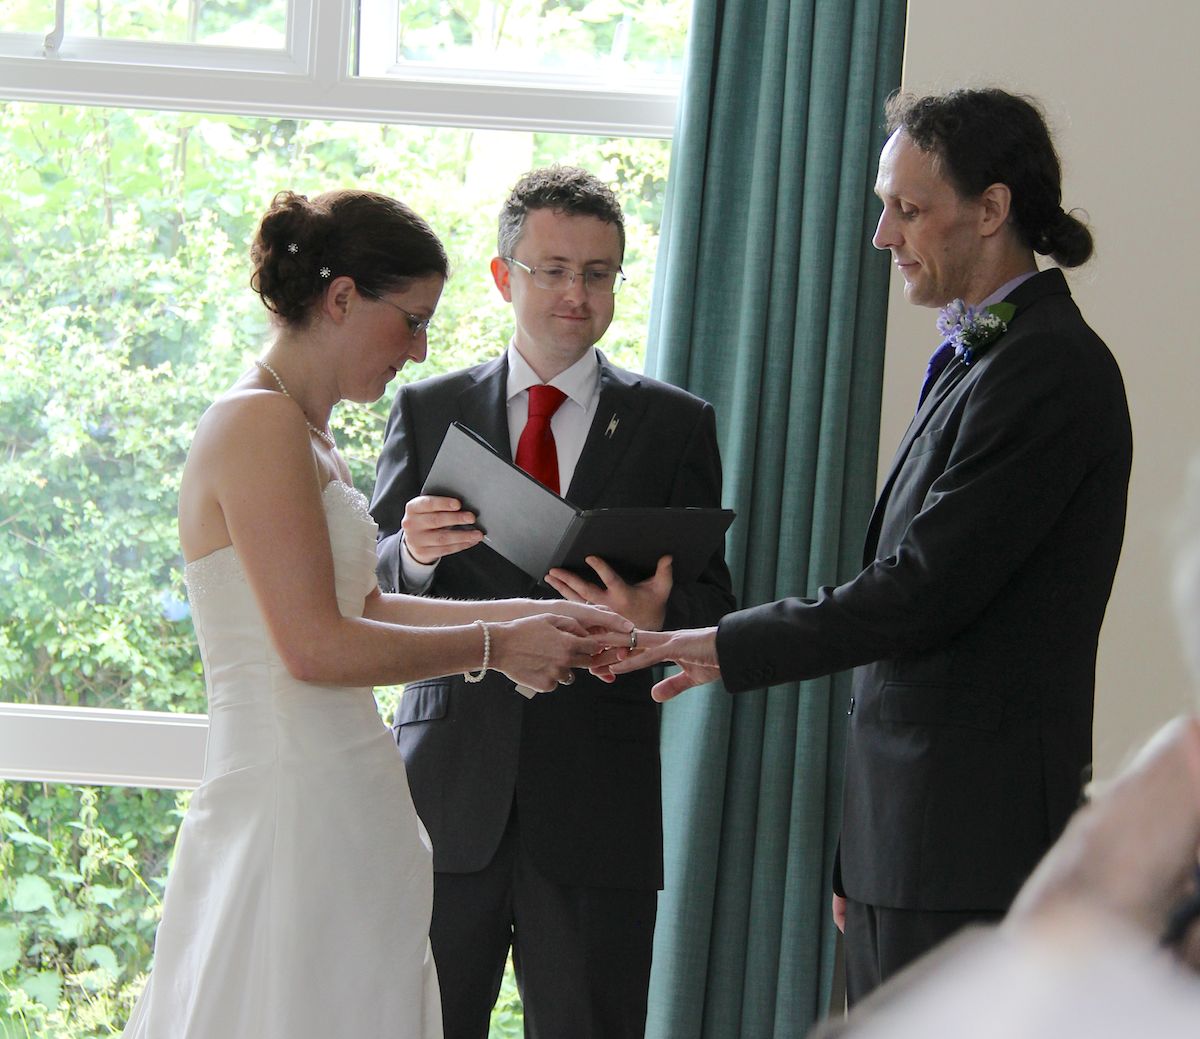 Bride and groom exchange rings while Ewan watches